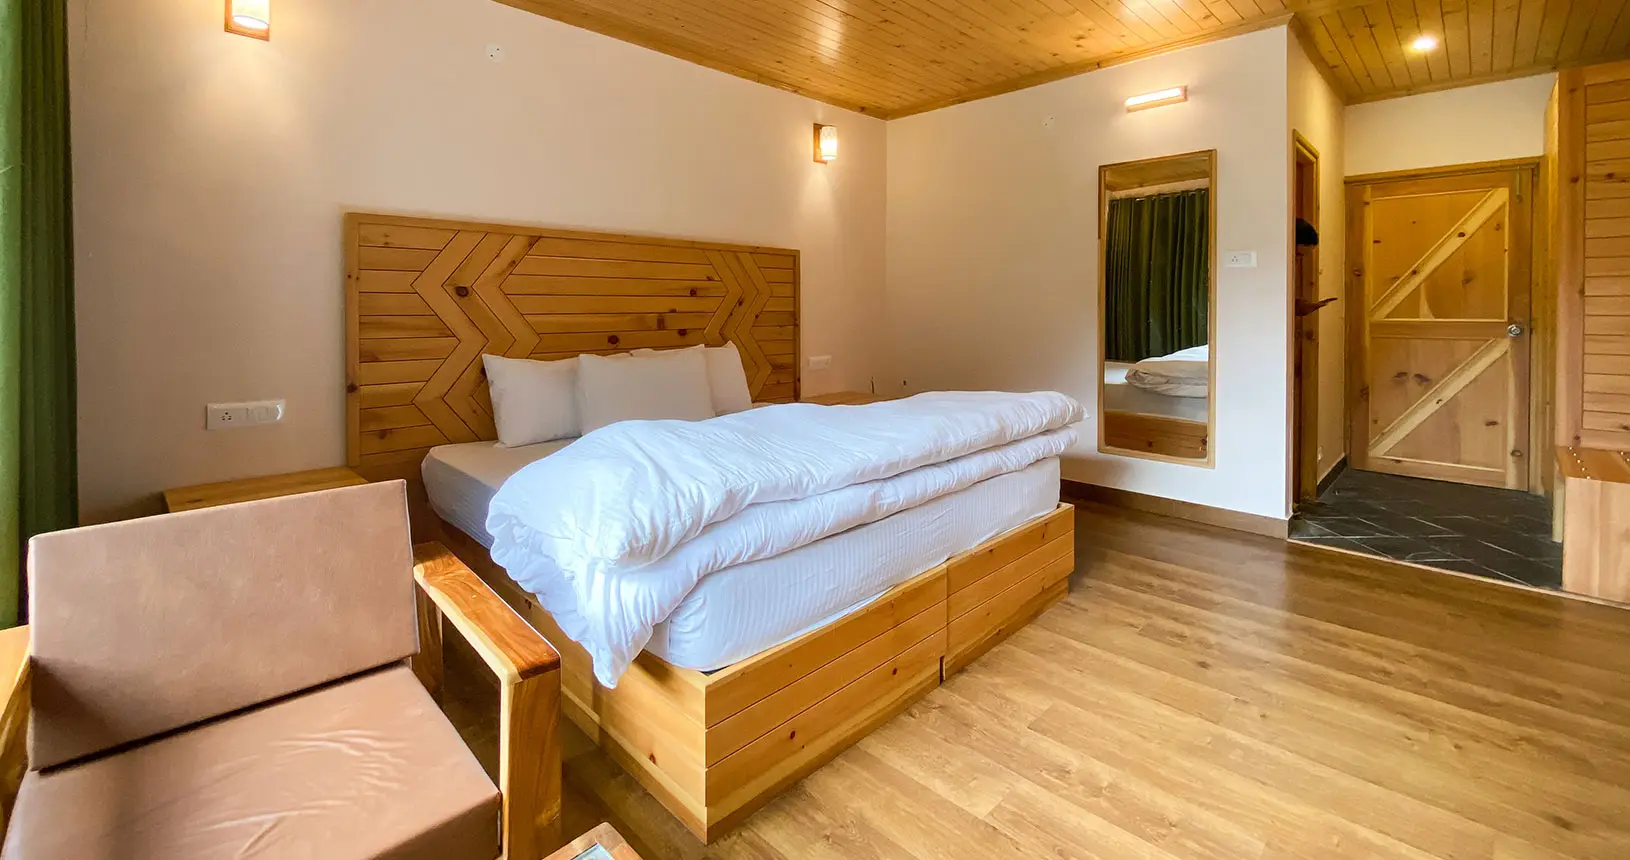 Bed and entrance of deluxe room in Hotel Batseri, Sangla.